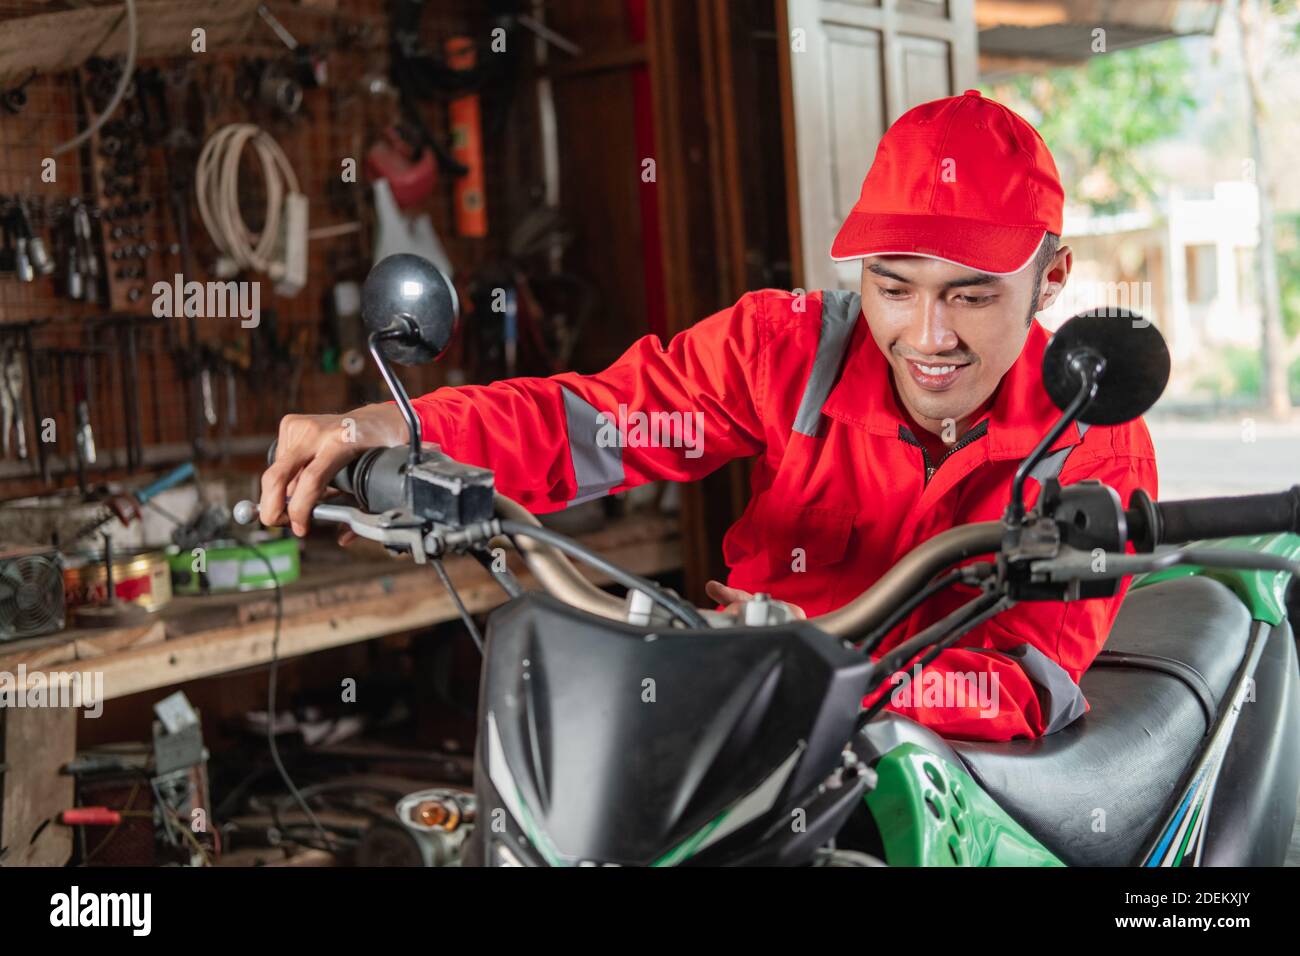 mechanic in a wearpack checks the engine throttle of the dirt bike in the garage Stock Photo